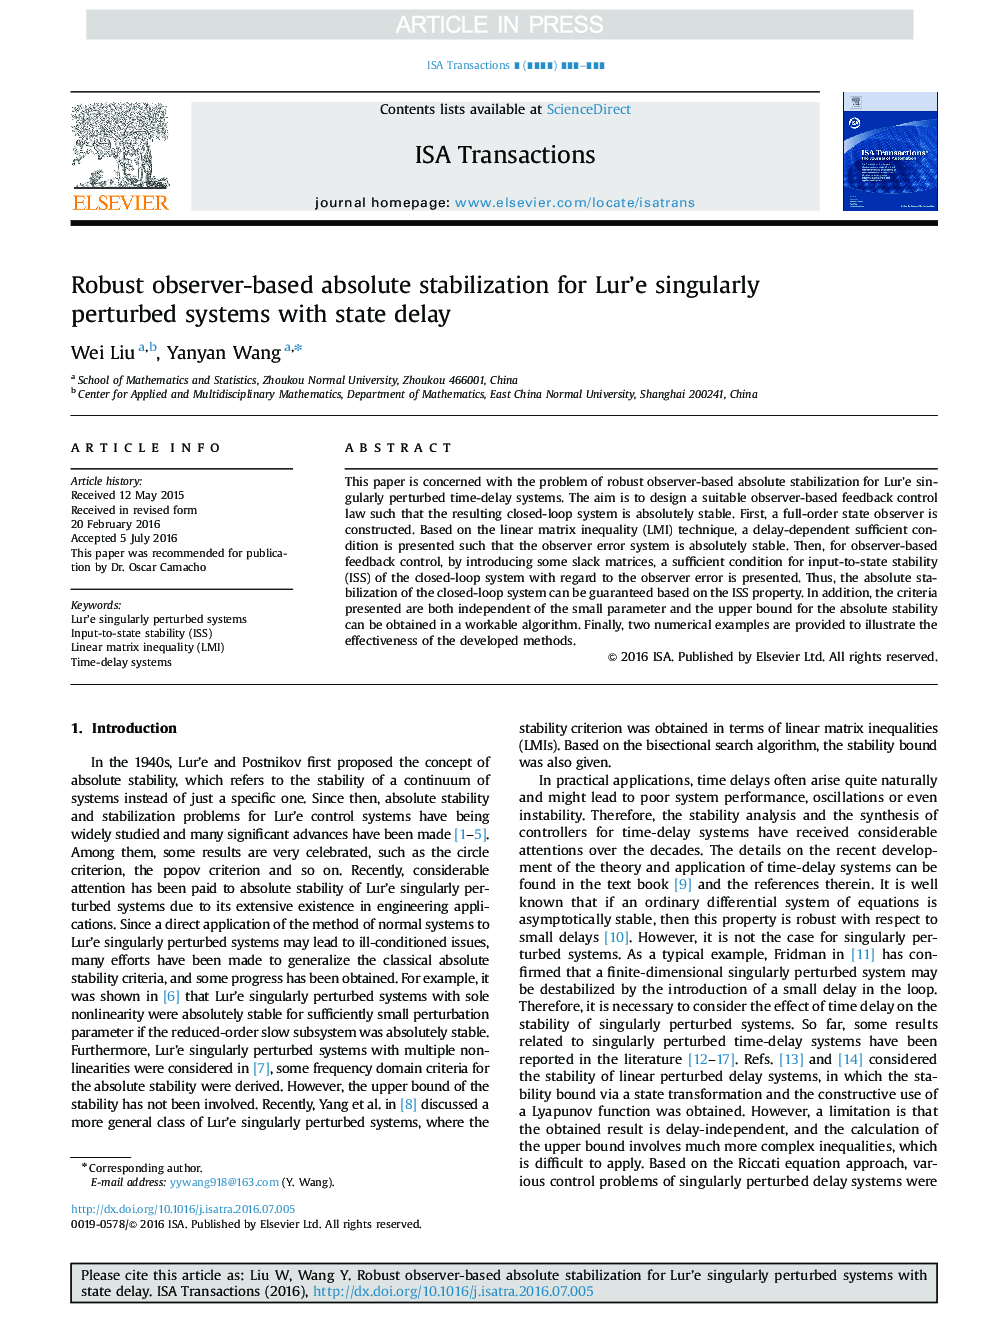 Robust observer-based absolute stabilization for Lur'e singularly perturbed systems with state delay